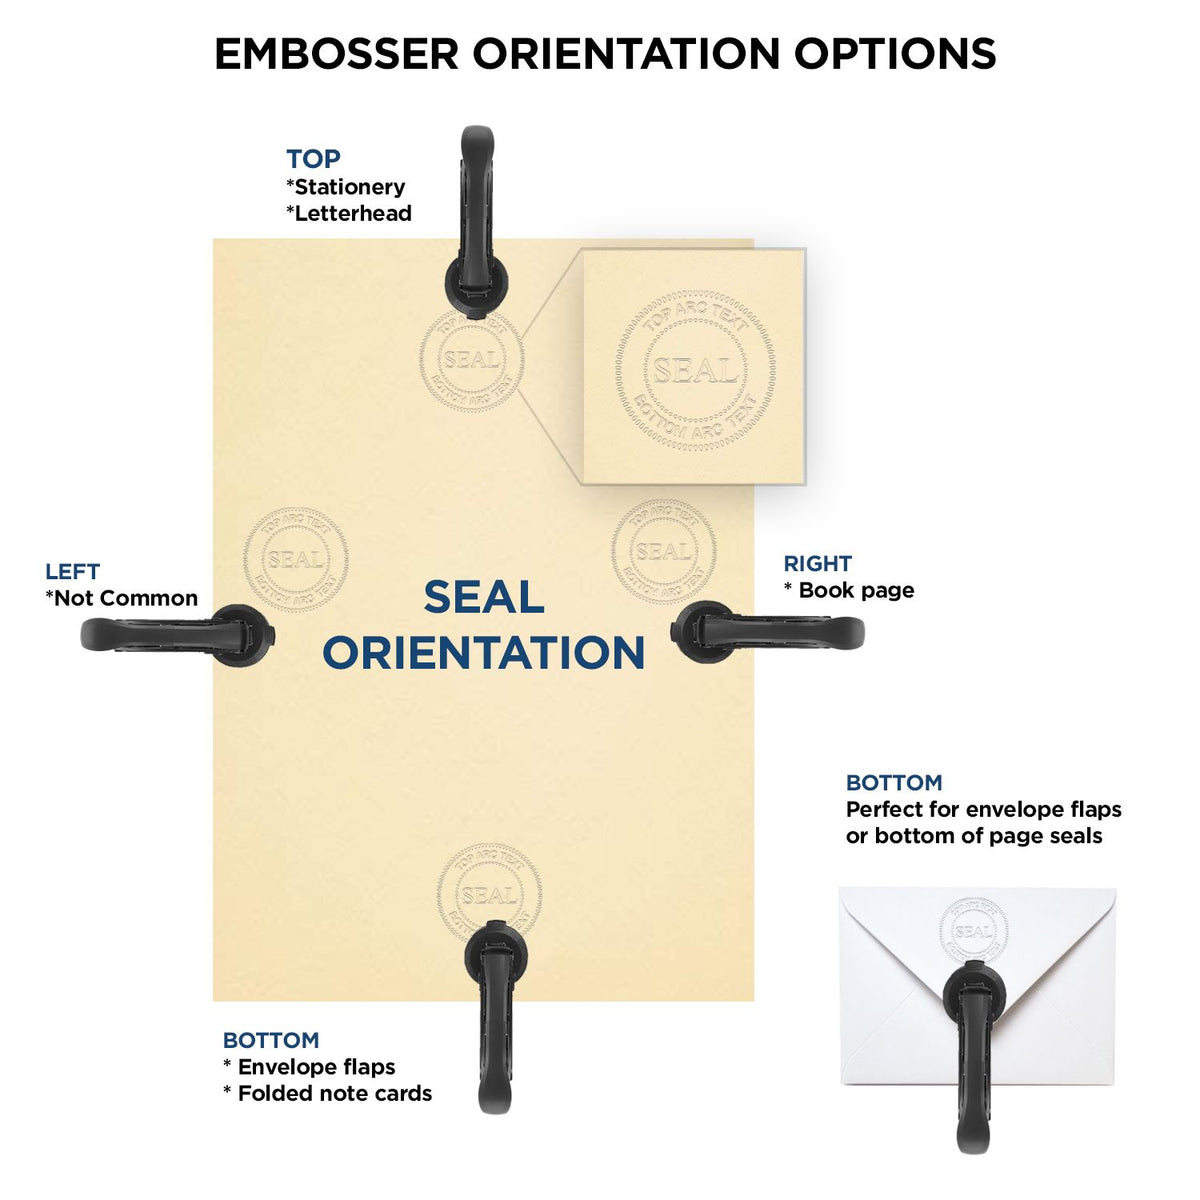 An infographic for the Long Reach Washington PE Seal showing embosser orientation, this is showing examples of a top, bottom, right and left insert.